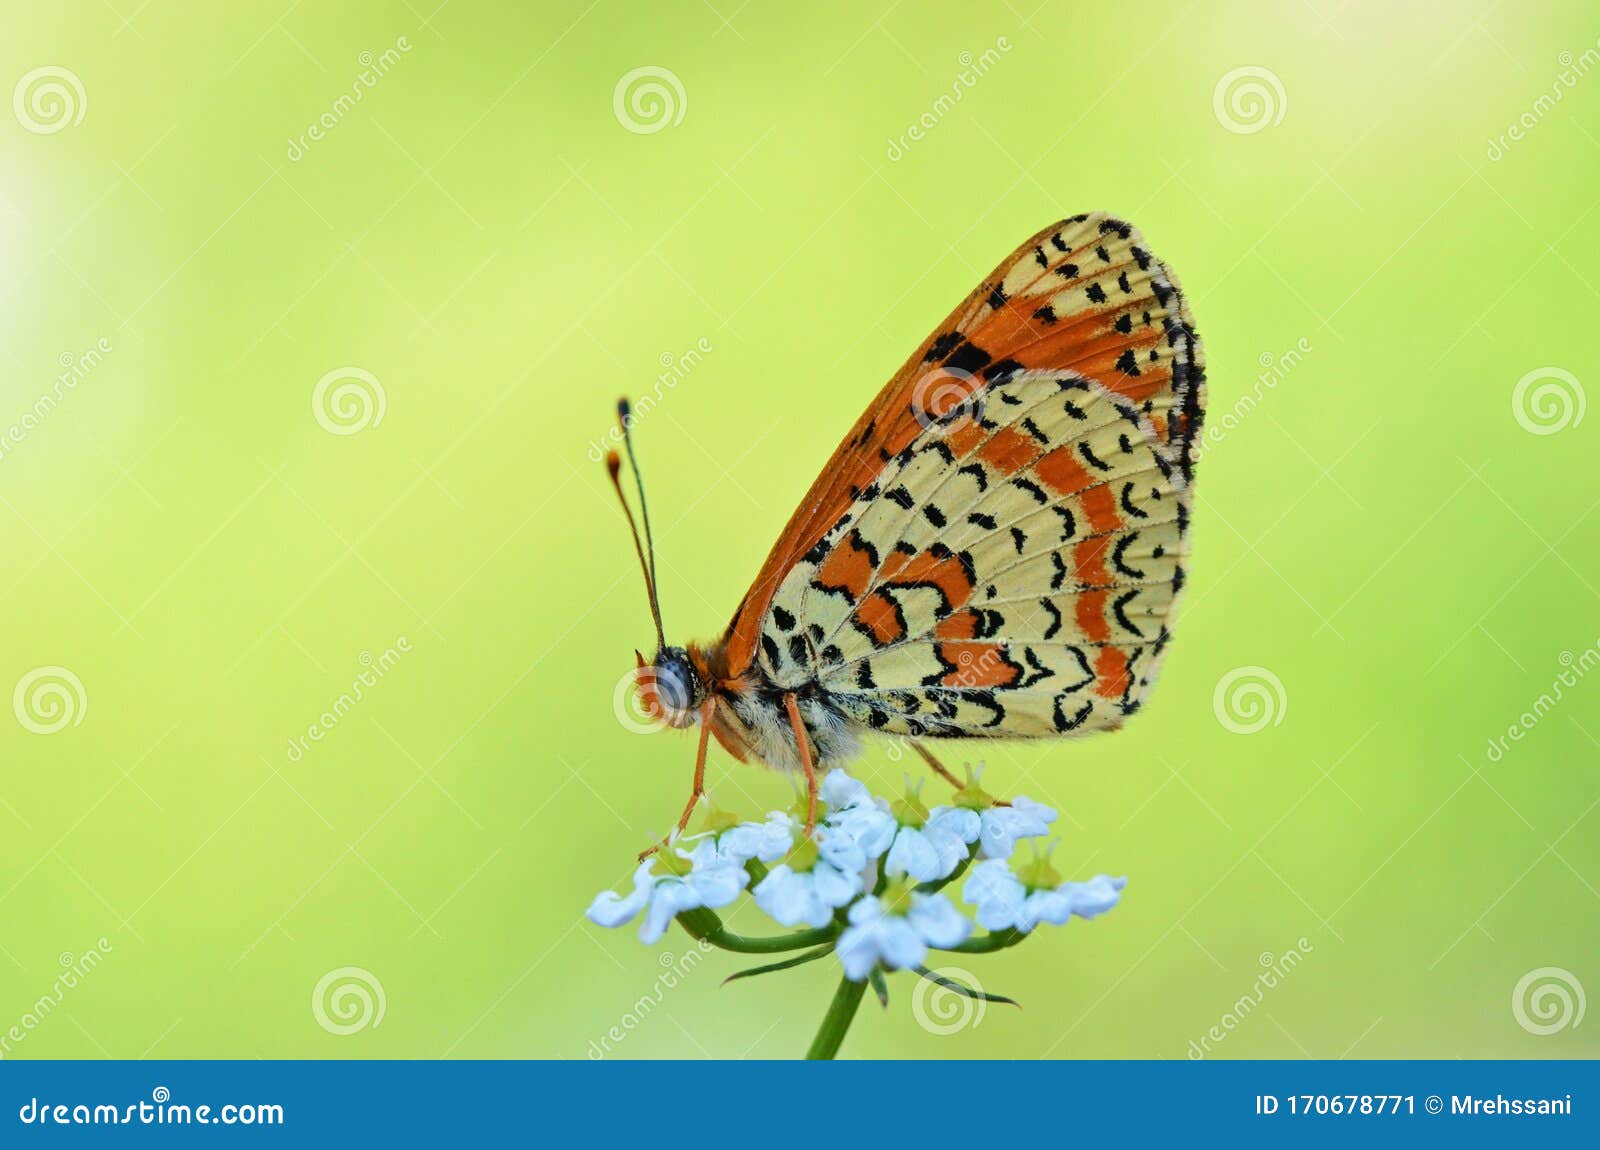 melitaea gina butterfly on white flower in yellow green background , butterflies of iran